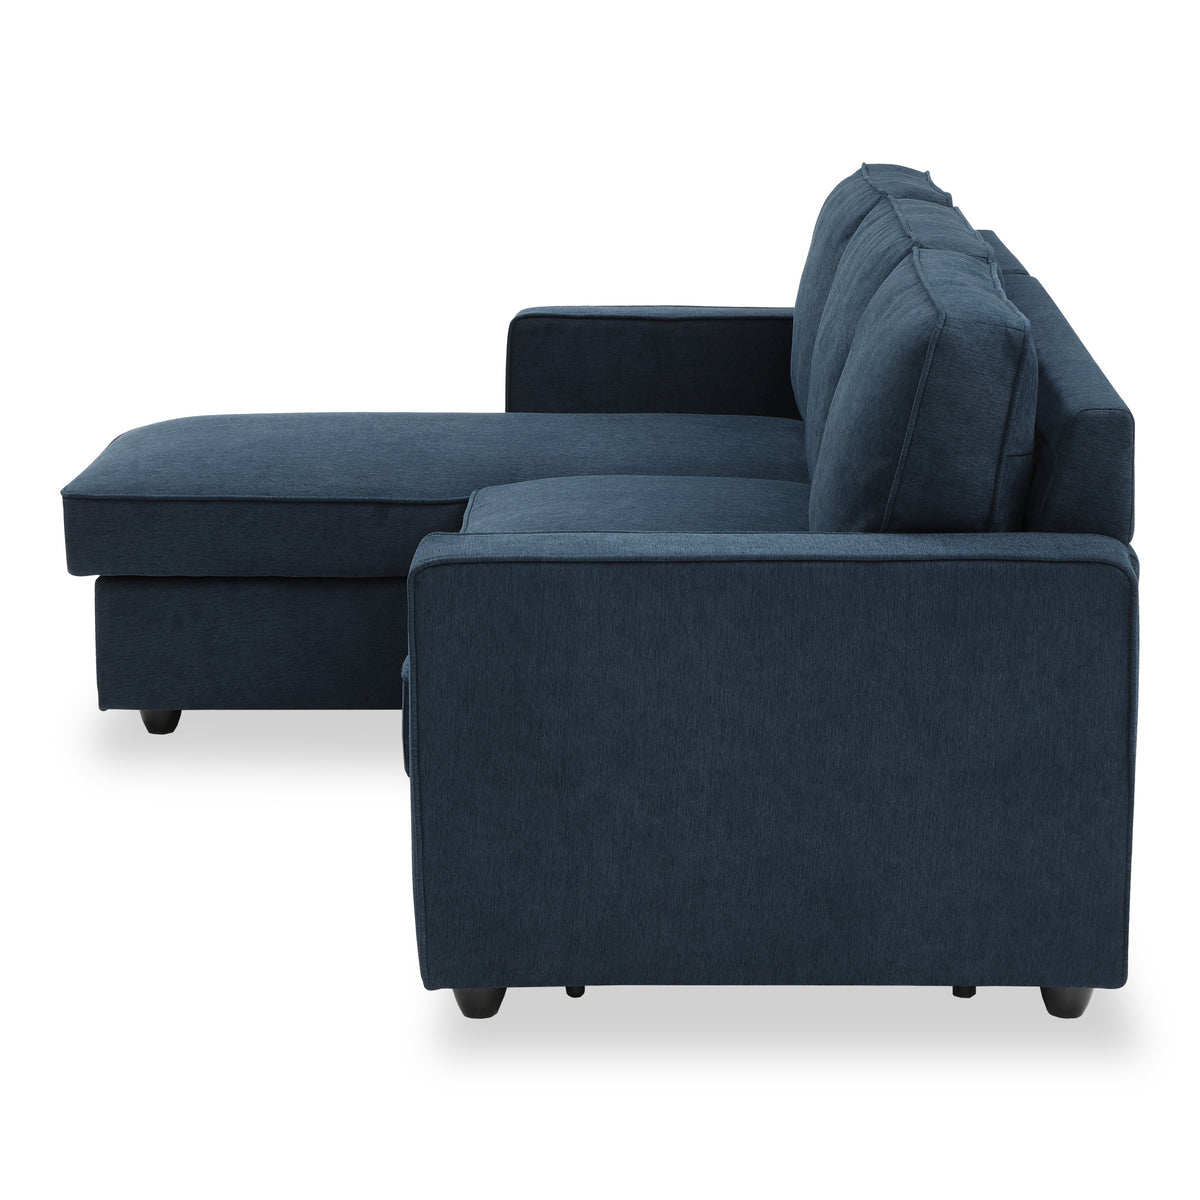 Soldier Blue 3 Seater Corner Chaise Sofa from Roseland Furniture